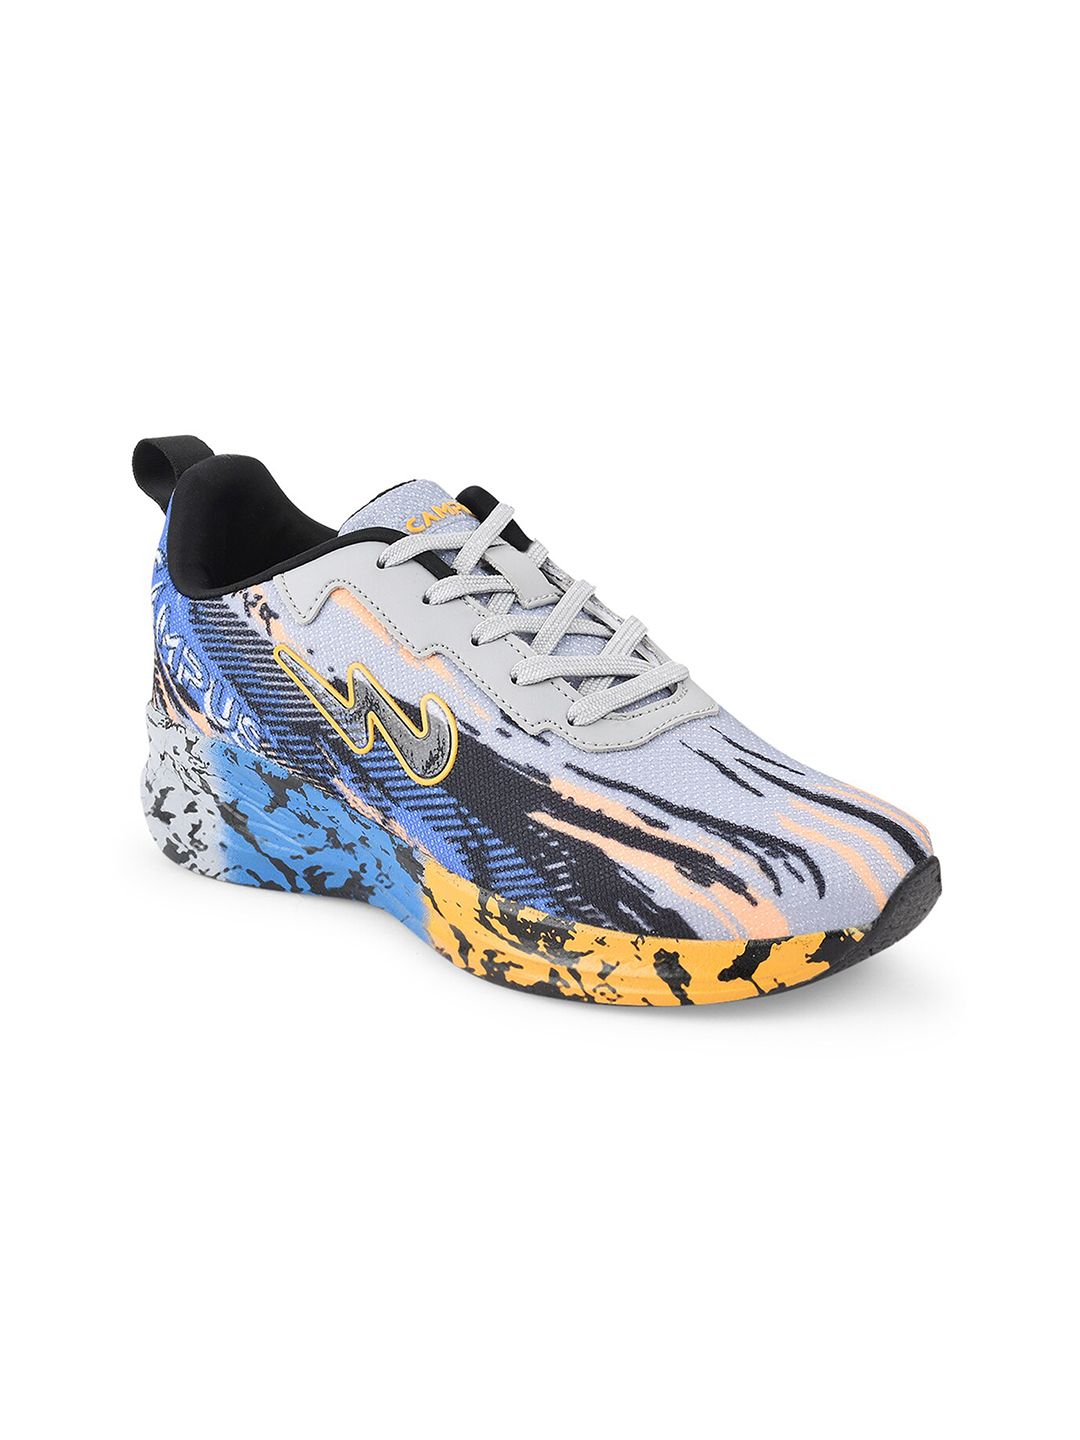 Campus Women Grey & Blue Printed Mesh Running Shoes Price in India